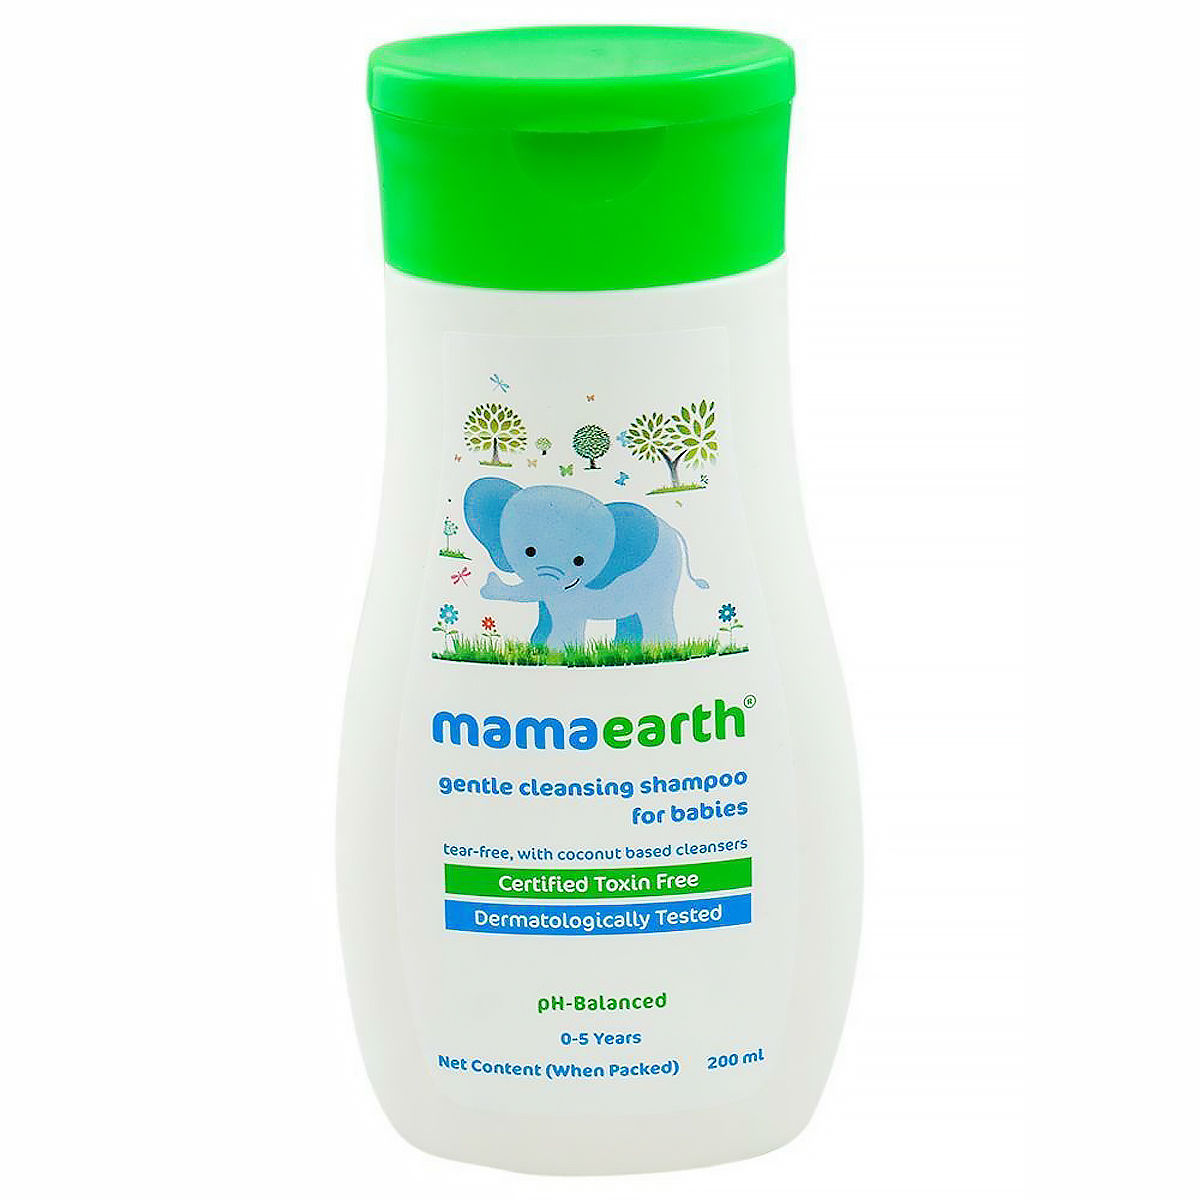 Buy Mamaearth Gentle Cleansing Shampoo for Babies 0 to 5 Years, 200 ml Online